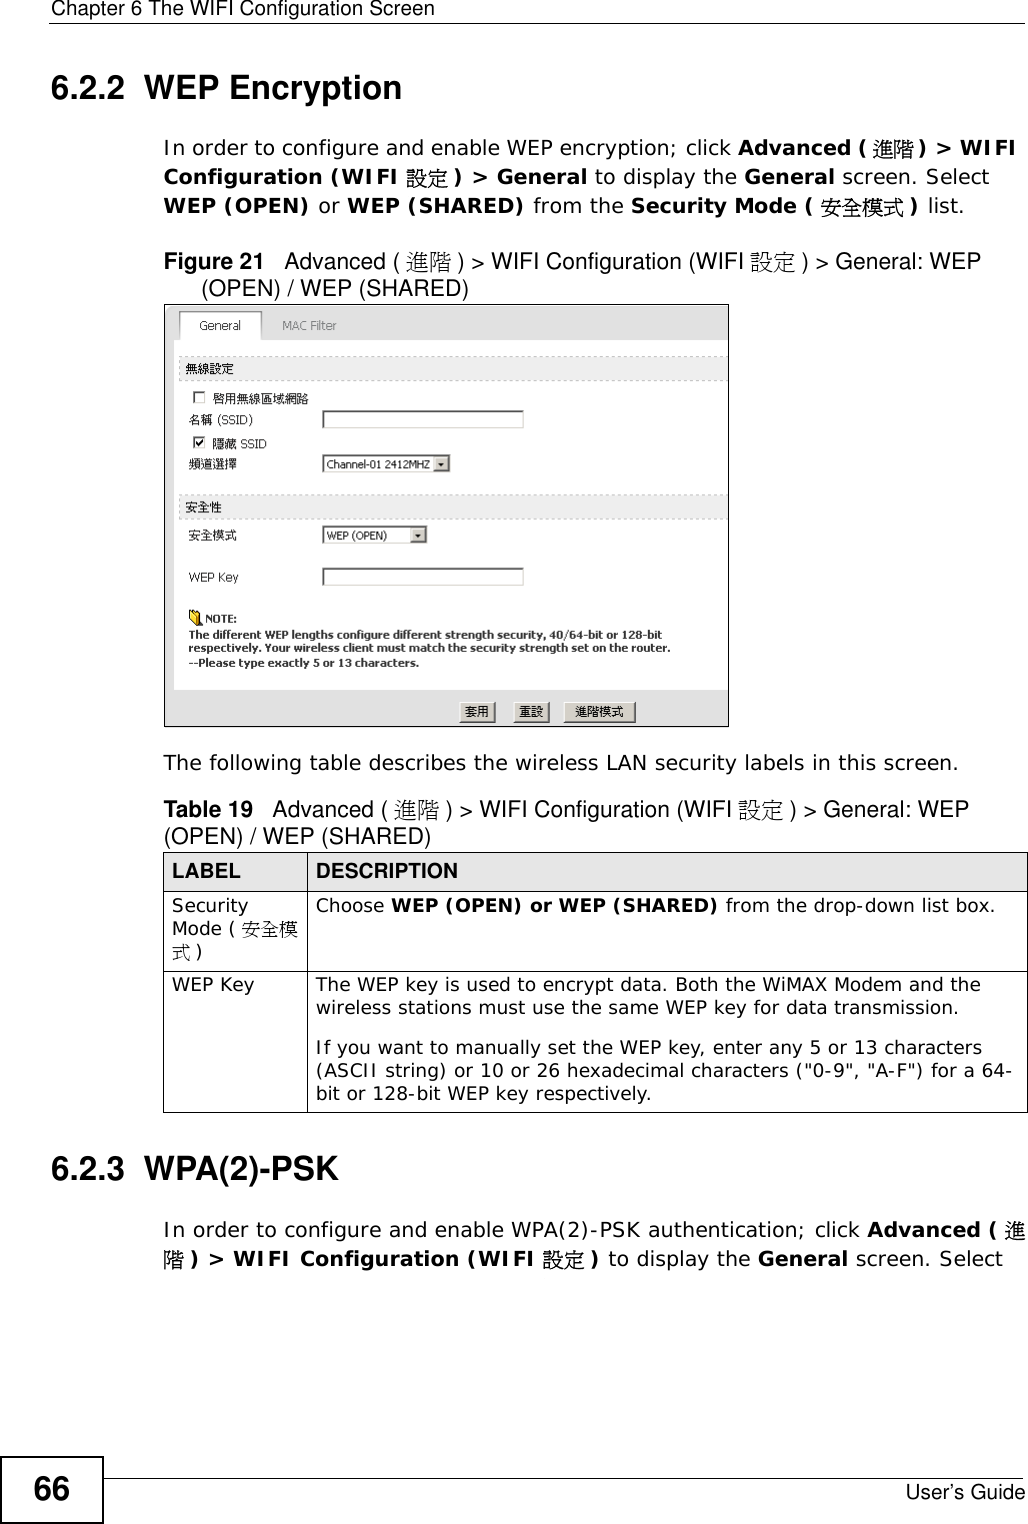 Chapter 6 The WIFI Configuration ScreenUser’s Guide666.2.2  WEP EncryptionIn order to configure and enable WEP encryption; click Advanced (進階) &gt; WIFI Configuration (WIFI 設定 ) &gt; General to display the General screen. Select WEP (OPEN) or WEP (SHARED) from the Security Mode ( 安全模式 ) list.Figure 21   Advanced ( 進階 ) &gt; WIFI Configuration (WIFI 設定 ) &gt; General: WEP (OPEN) / WEP (SHARED)The following table describes the wireless LAN security labels in this screen.6.2.3  WPA(2)-PSK In order to configure and enable WPA(2)-PSK authentication; click Advanced ( 進階) &gt; WIFI Configuration (WIFI 設定 ) to display the General screen. Select Table 19   Advanced ( 進階 ) &gt; WIFI Configuration (WIFI 設定 ) &gt; General: WEP (OPEN) / WEP (SHARED)LABEL DESCRIPTIONSecurity Mode ( 安全模式)Choose WEP (OPEN) or WEP (SHARED) from the drop-down list box.WEP Key The WEP key is used to encrypt data. Both the WiMAX Modem and the wireless stations must use the same WEP key for data transmission.If you want to manually set the WEP key, enter any 5 or 13 characters (ASCII string) or 10 or 26 hexadecimal characters (&quot;0-9&quot;, &quot;A-F&quot;) for a 64-bit or 128-bit WEP key respectively.